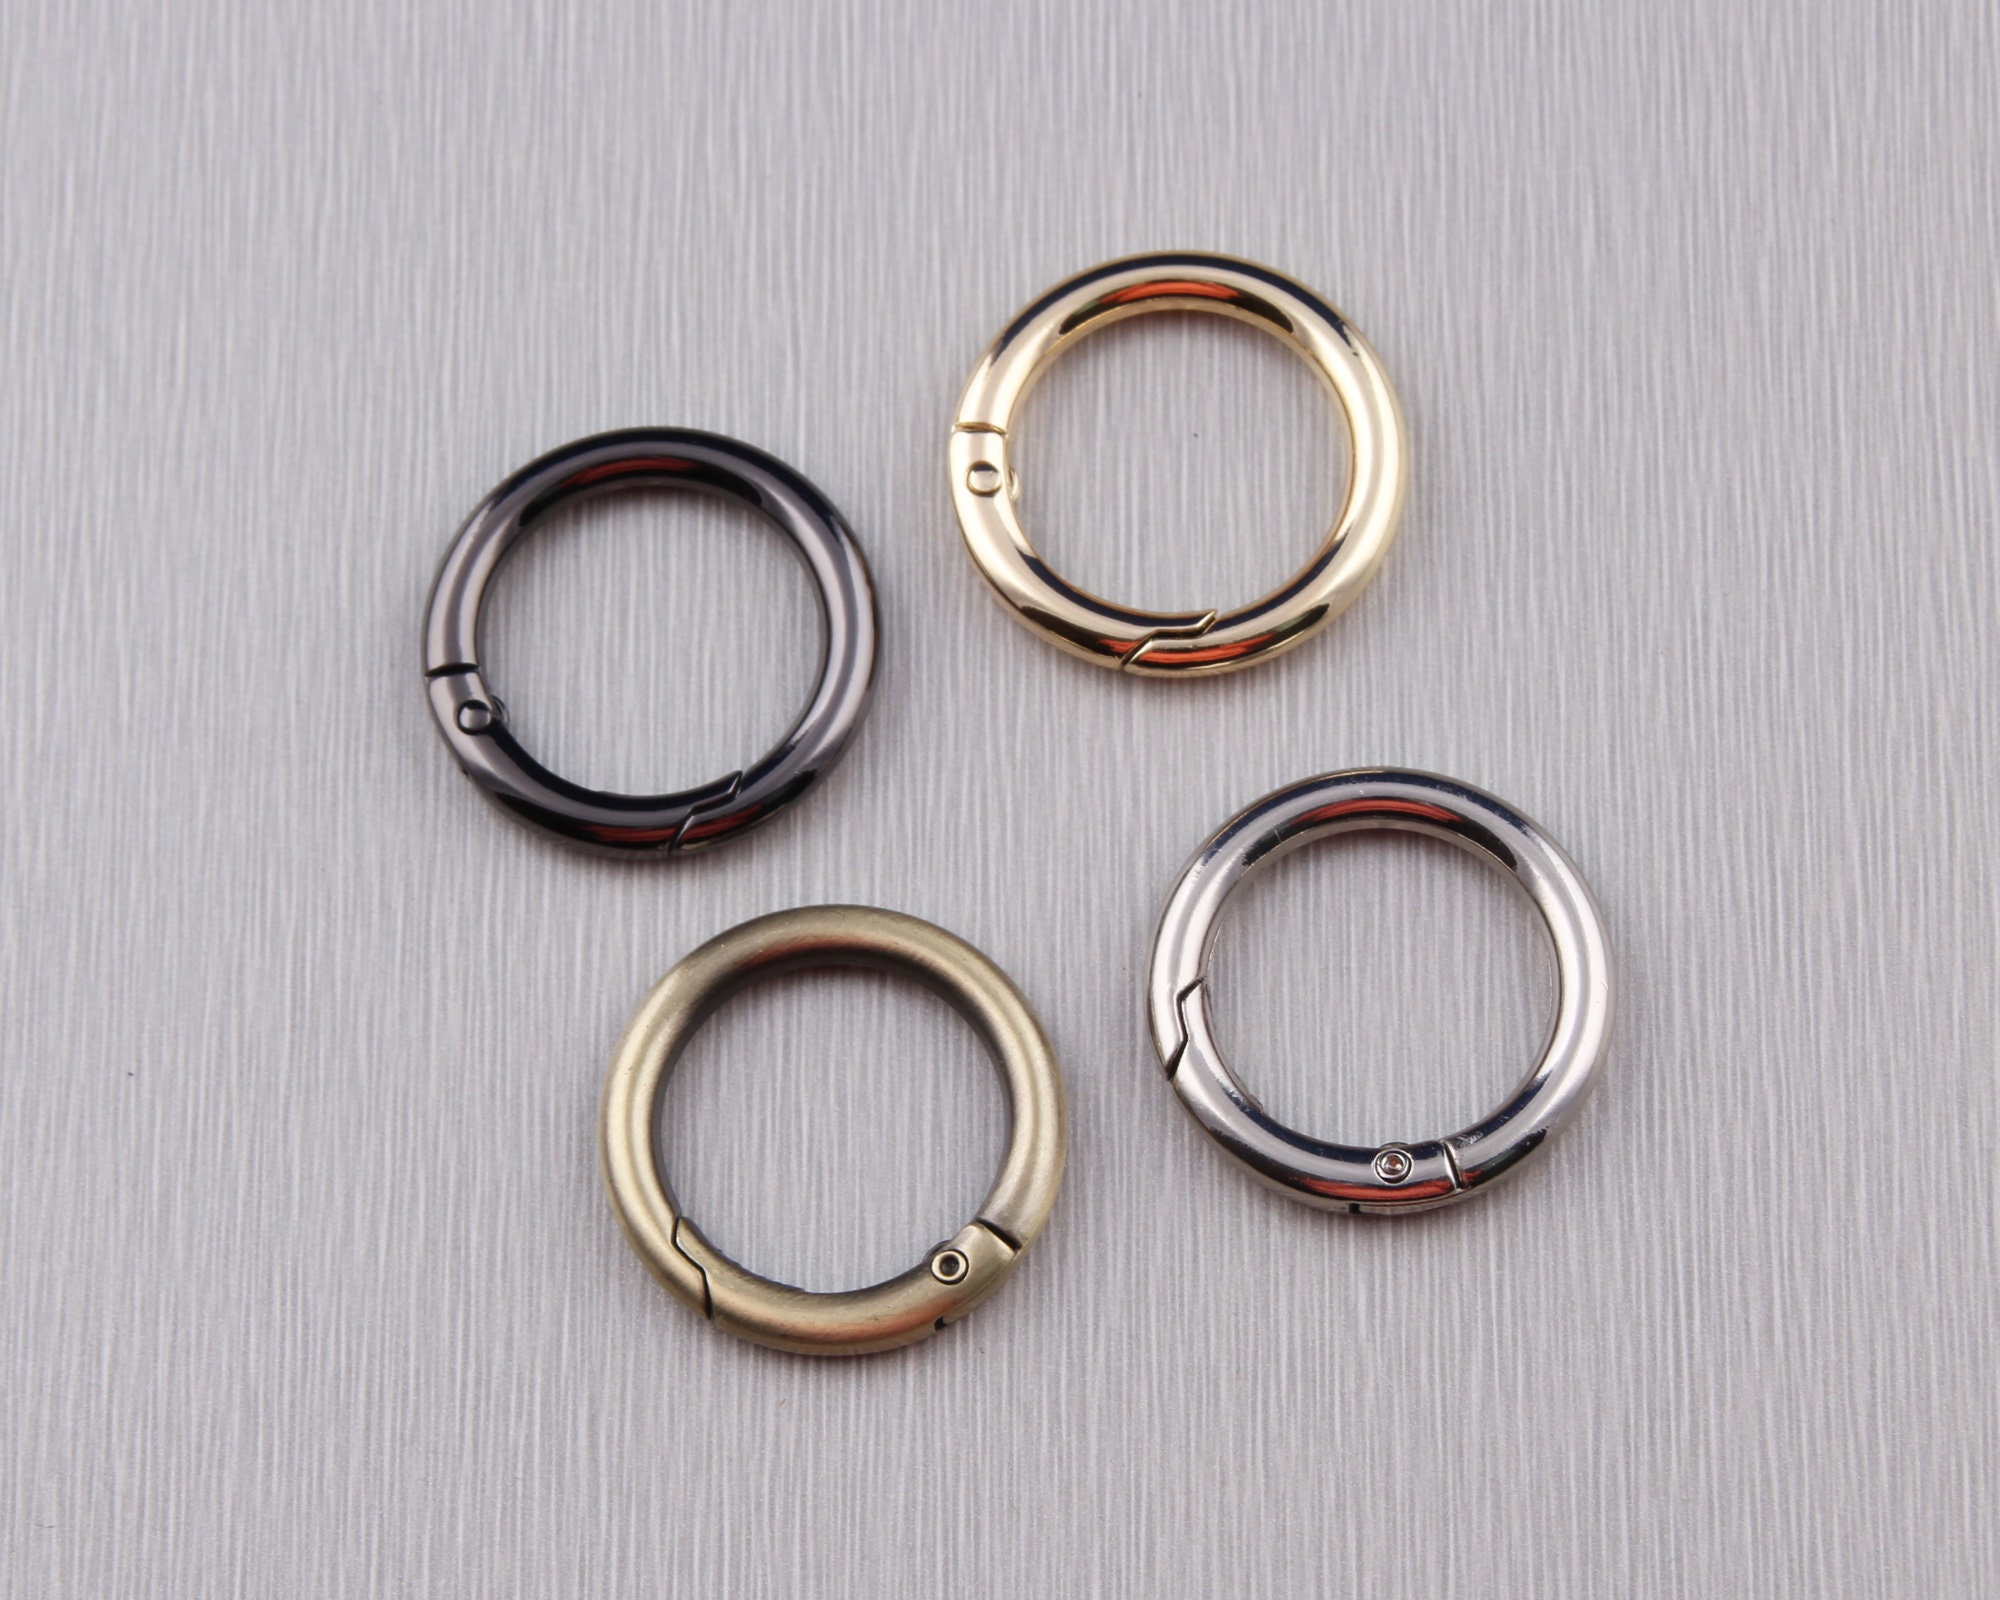 2.5 Inch Heavy Duty Metal Ring, Nickel-plated Harness Ring